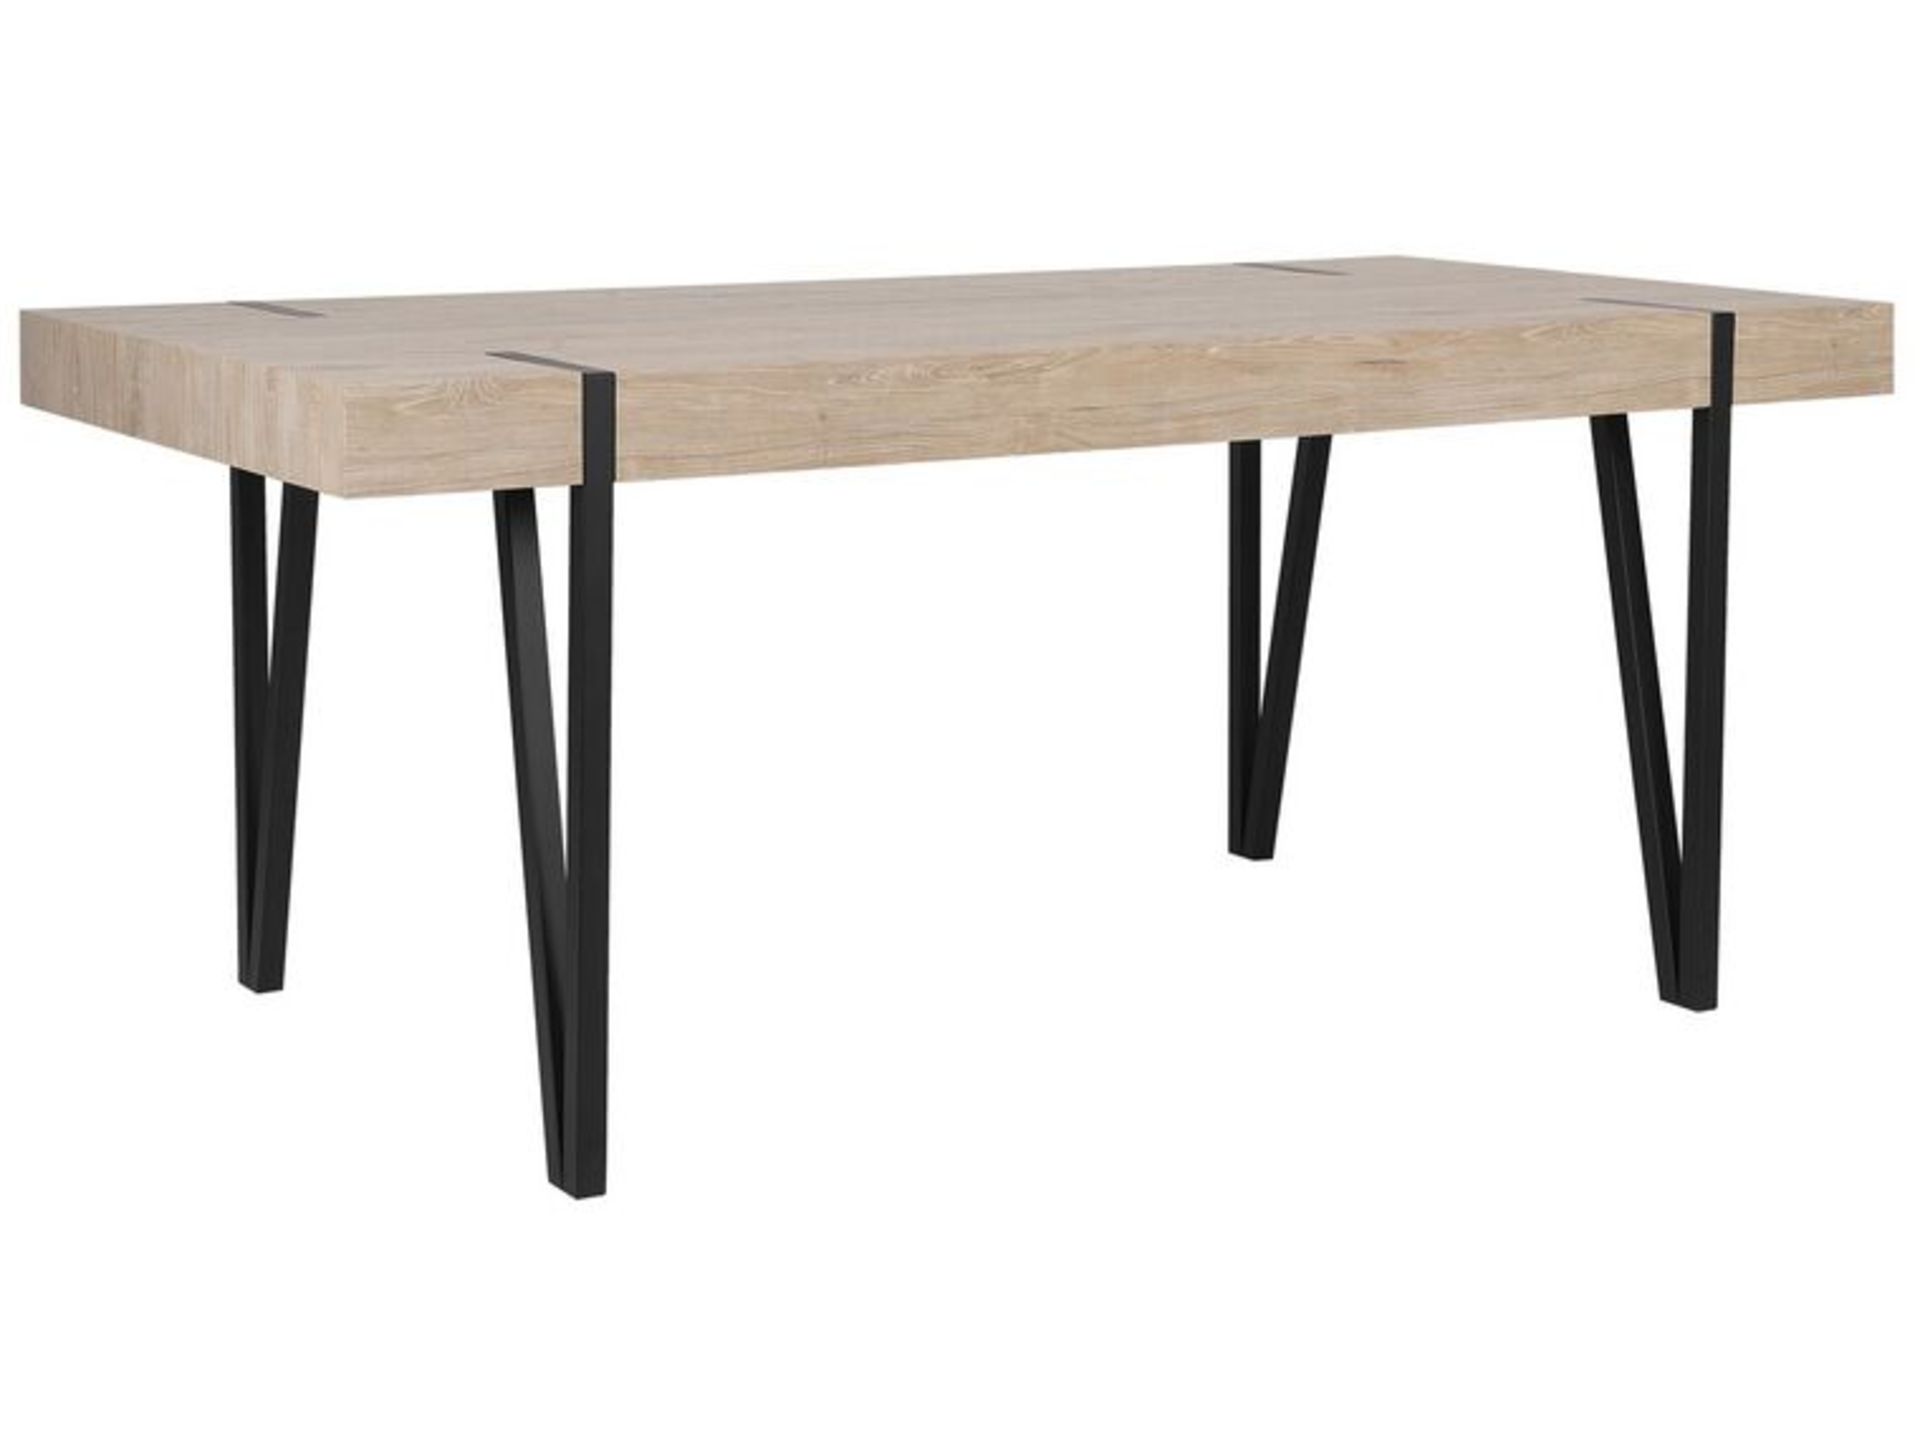 Adena Dining Table 180 x 90 cm Light Wood with Black. - SR6. RRP £569.99. Designed to implement